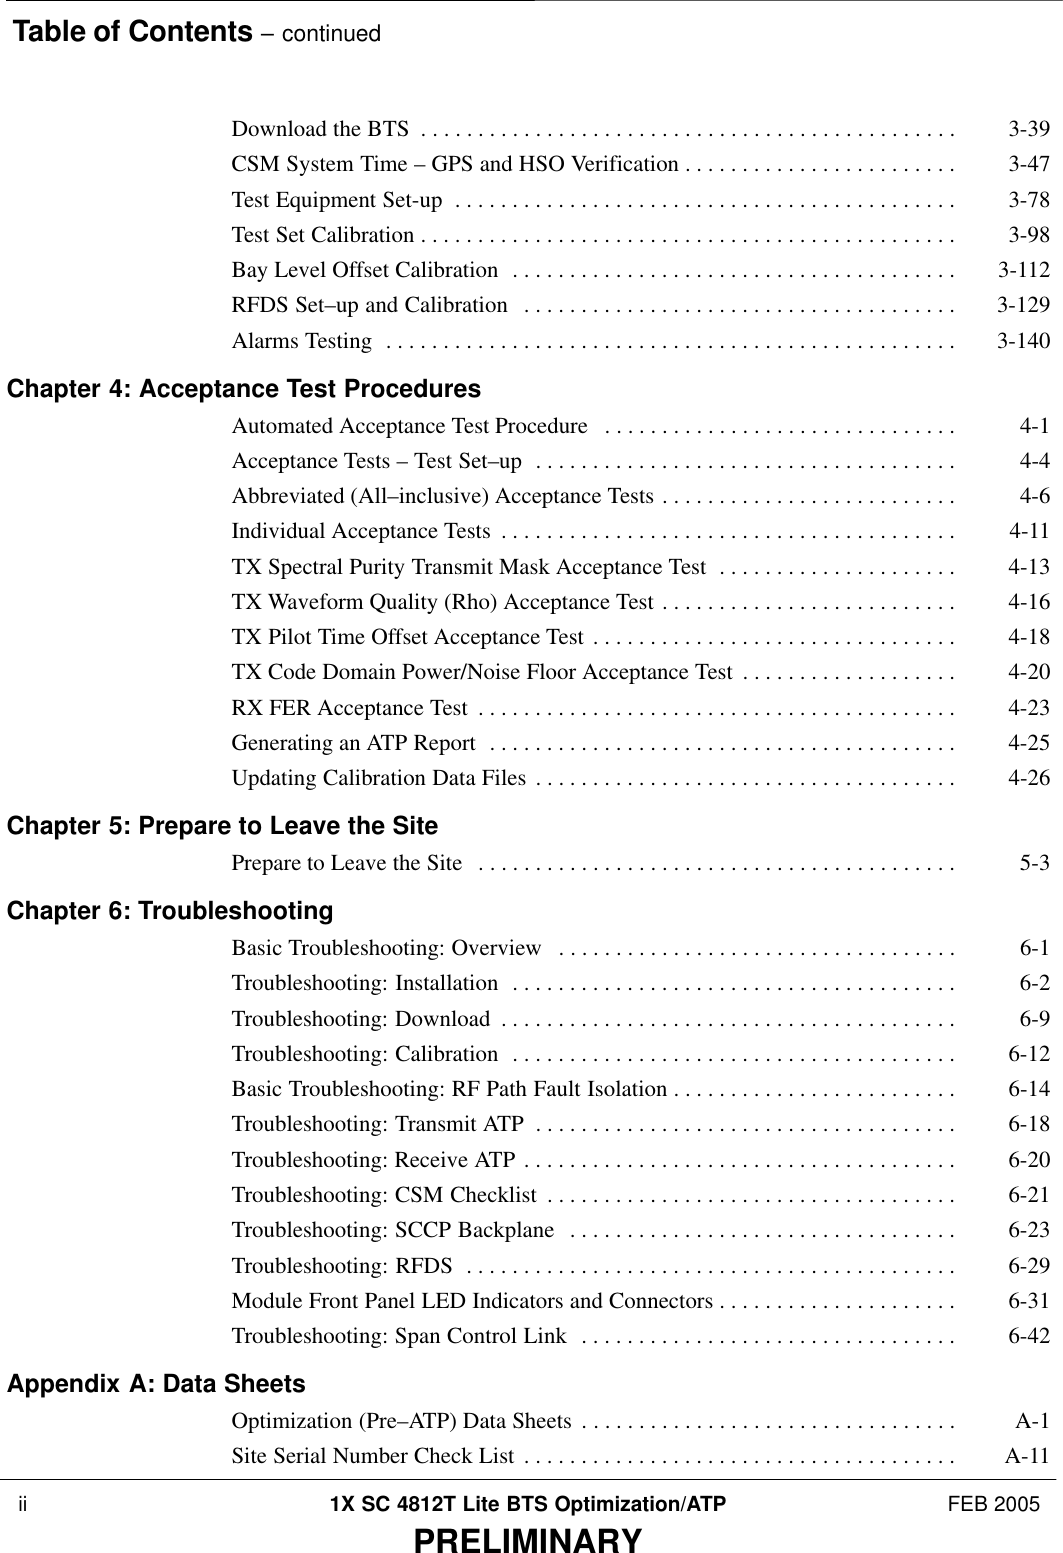 Table of Contents – continued ii 1X SC 4812T Lite BTS Optimization/ATP FEB 2005PRELIMINARYDownload the BTS 3-39 . . . . . . . . . . . . . . . . . . . . . . . . . . . . . . . . . . . . . . . . . . . . . . . CSM System Time – GPS and HSO Verification 3-47 . . . . . . . . . . . . . . . . . . . . . . . . Test Equipment Set-up 3-78 . . . . . . . . . . . . . . . . . . . . . . . . . . . . . . . . . . . . . . . . . . . . Test Set Calibration 3-98 . . . . . . . . . . . . . . . . . . . . . . . . . . . . . . . . . . . . . . . . . . . . . . . Bay Level Offset Calibration 3-112 . . . . . . . . . . . . . . . . . . . . . . . . . . . . . . . . . . . . . . . RFDS Set–up and Calibration 3-129 . . . . . . . . . . . . . . . . . . . . . . . . . . . . . . . . . . . . . . Alarms Testing 3-140 . . . . . . . . . . . . . . . . . . . . . . . . . . . . . . . . . . . . . . . . . . . . . . . . . . Chapter 4: Acceptance Test ProceduresAutomated Acceptance Test Procedure 4-1 . . . . . . . . . . . . . . . . . . . . . . . . . . . . . . . Acceptance Tests – Test Set–up 4-4 . . . . . . . . . . . . . . . . . . . . . . . . . . . . . . . . . . . . . Abbreviated (All–inclusive) Acceptance Tests 4-6 . . . . . . . . . . . . . . . . . . . . . . . . . . Individual Acceptance Tests 4-11 . . . . . . . . . . . . . . . . . . . . . . . . . . . . . . . . . . . . . . . . TX Spectral Purity Transmit Mask Acceptance Test 4-13 . . . . . . . . . . . . . . . . . . . . . TX Waveform Quality (Rho) Acceptance Test 4-16 . . . . . . . . . . . . . . . . . . . . . . . . . . TX Pilot Time Offset Acceptance Test 4-18 . . . . . . . . . . . . . . . . . . . . . . . . . . . . . . . . TX Code Domain Power/Noise Floor Acceptance Test 4-20 . . . . . . . . . . . . . . . . . . . RX FER Acceptance Test 4-23 . . . . . . . . . . . . . . . . . . . . . . . . . . . . . . . . . . . . . . . . . . Generating an ATP Report 4-25 . . . . . . . . . . . . . . . . . . . . . . . . . . . . . . . . . . . . . . . . . Updating Calibration Data Files 4-26 . . . . . . . . . . . . . . . . . . . . . . . . . . . . . . . . . . . . . Chapter 5: Prepare to Leave the SitePrepare to Leave the Site 5-3 . . . . . . . . . . . . . . . . . . . . . . . . . . . . . . . . . . . . . . . . . . Chapter 6: TroubleshootingBasic Troubleshooting: Overview 6-1 . . . . . . . . . . . . . . . . . . . . . . . . . . . . . . . . . . . Troubleshooting: Installation 6-2 . . . . . . . . . . . . . . . . . . . . . . . . . . . . . . . . . . . . . . . Troubleshooting: Download 6-9 . . . . . . . . . . . . . . . . . . . . . . . . . . . . . . . . . . . . . . . . Troubleshooting: Calibration 6-12 . . . . . . . . . . . . . . . . . . . . . . . . . . . . . . . . . . . . . . . Basic Troubleshooting: RF Path Fault Isolation 6-14 . . . . . . . . . . . . . . . . . . . . . . . . . Troubleshooting: Transmit ATP 6-18 . . . . . . . . . . . . . . . . . . . . . . . . . . . . . . . . . . . . . Troubleshooting: Receive ATP 6-20 . . . . . . . . . . . . . . . . . . . . . . . . . . . . . . . . . . . . . . Troubleshooting: CSM Checklist 6-21 . . . . . . . . . . . . . . . . . . . . . . . . . . . . . . . . . . . . Troubleshooting: SCCP Backplane 6-23 . . . . . . . . . . . . . . . . . . . . . . . . . . . . . . . . . . Troubleshooting: RFDS 6-29 . . . . . . . . . . . . . . . . . . . . . . . . . . . . . . . . . . . . . . . . . . . Module Front Panel LED Indicators and Connectors 6-31 . . . . . . . . . . . . . . . . . . . . . Troubleshooting: Span Control Link 6-42 . . . . . . . . . . . . . . . . . . . . . . . . . . . . . . . . . Appendix A: Data SheetsOptimization (Pre–ATP) Data Sheets A-1 . . . . . . . . . . . . . . . . . . . . . . . . . . . . . . . . . Site Serial Number Check List A-11 . . . . . . . . . . . . . . . . . . . . . . . . . . . . . . . . . . . . . . 